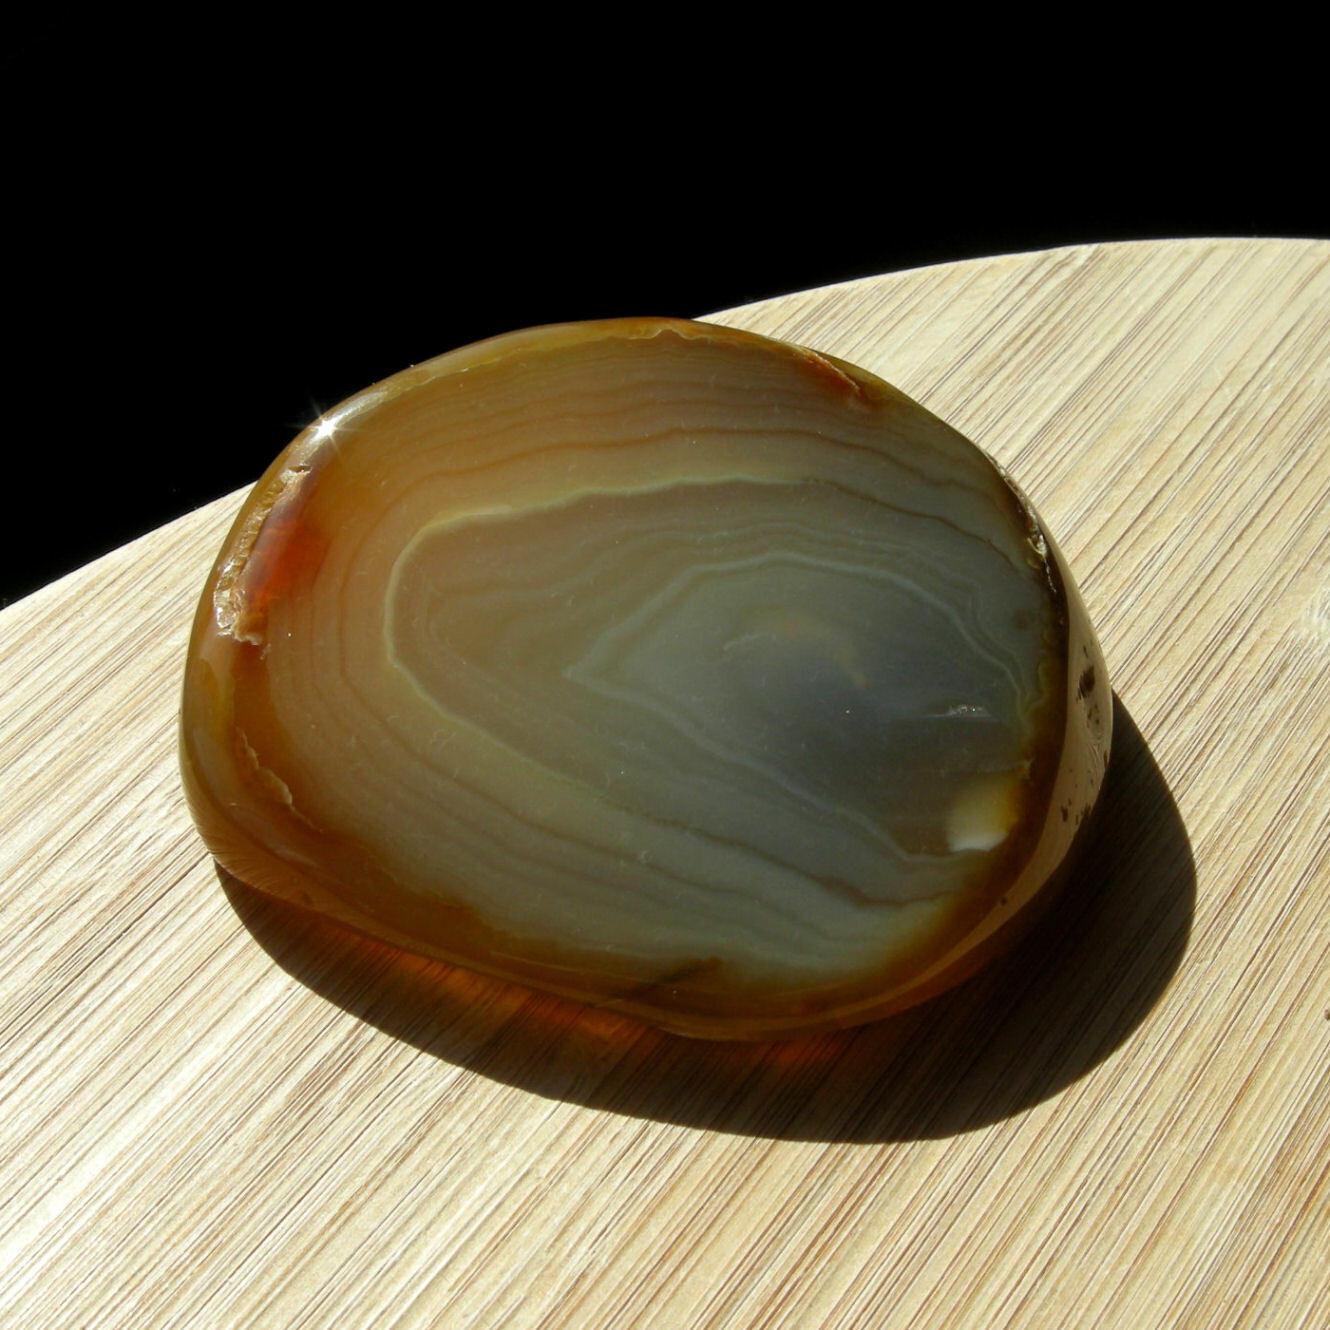 Agate Geode Half Small Polished Brown Crystal Display Stone Fine Banding 3 Inch